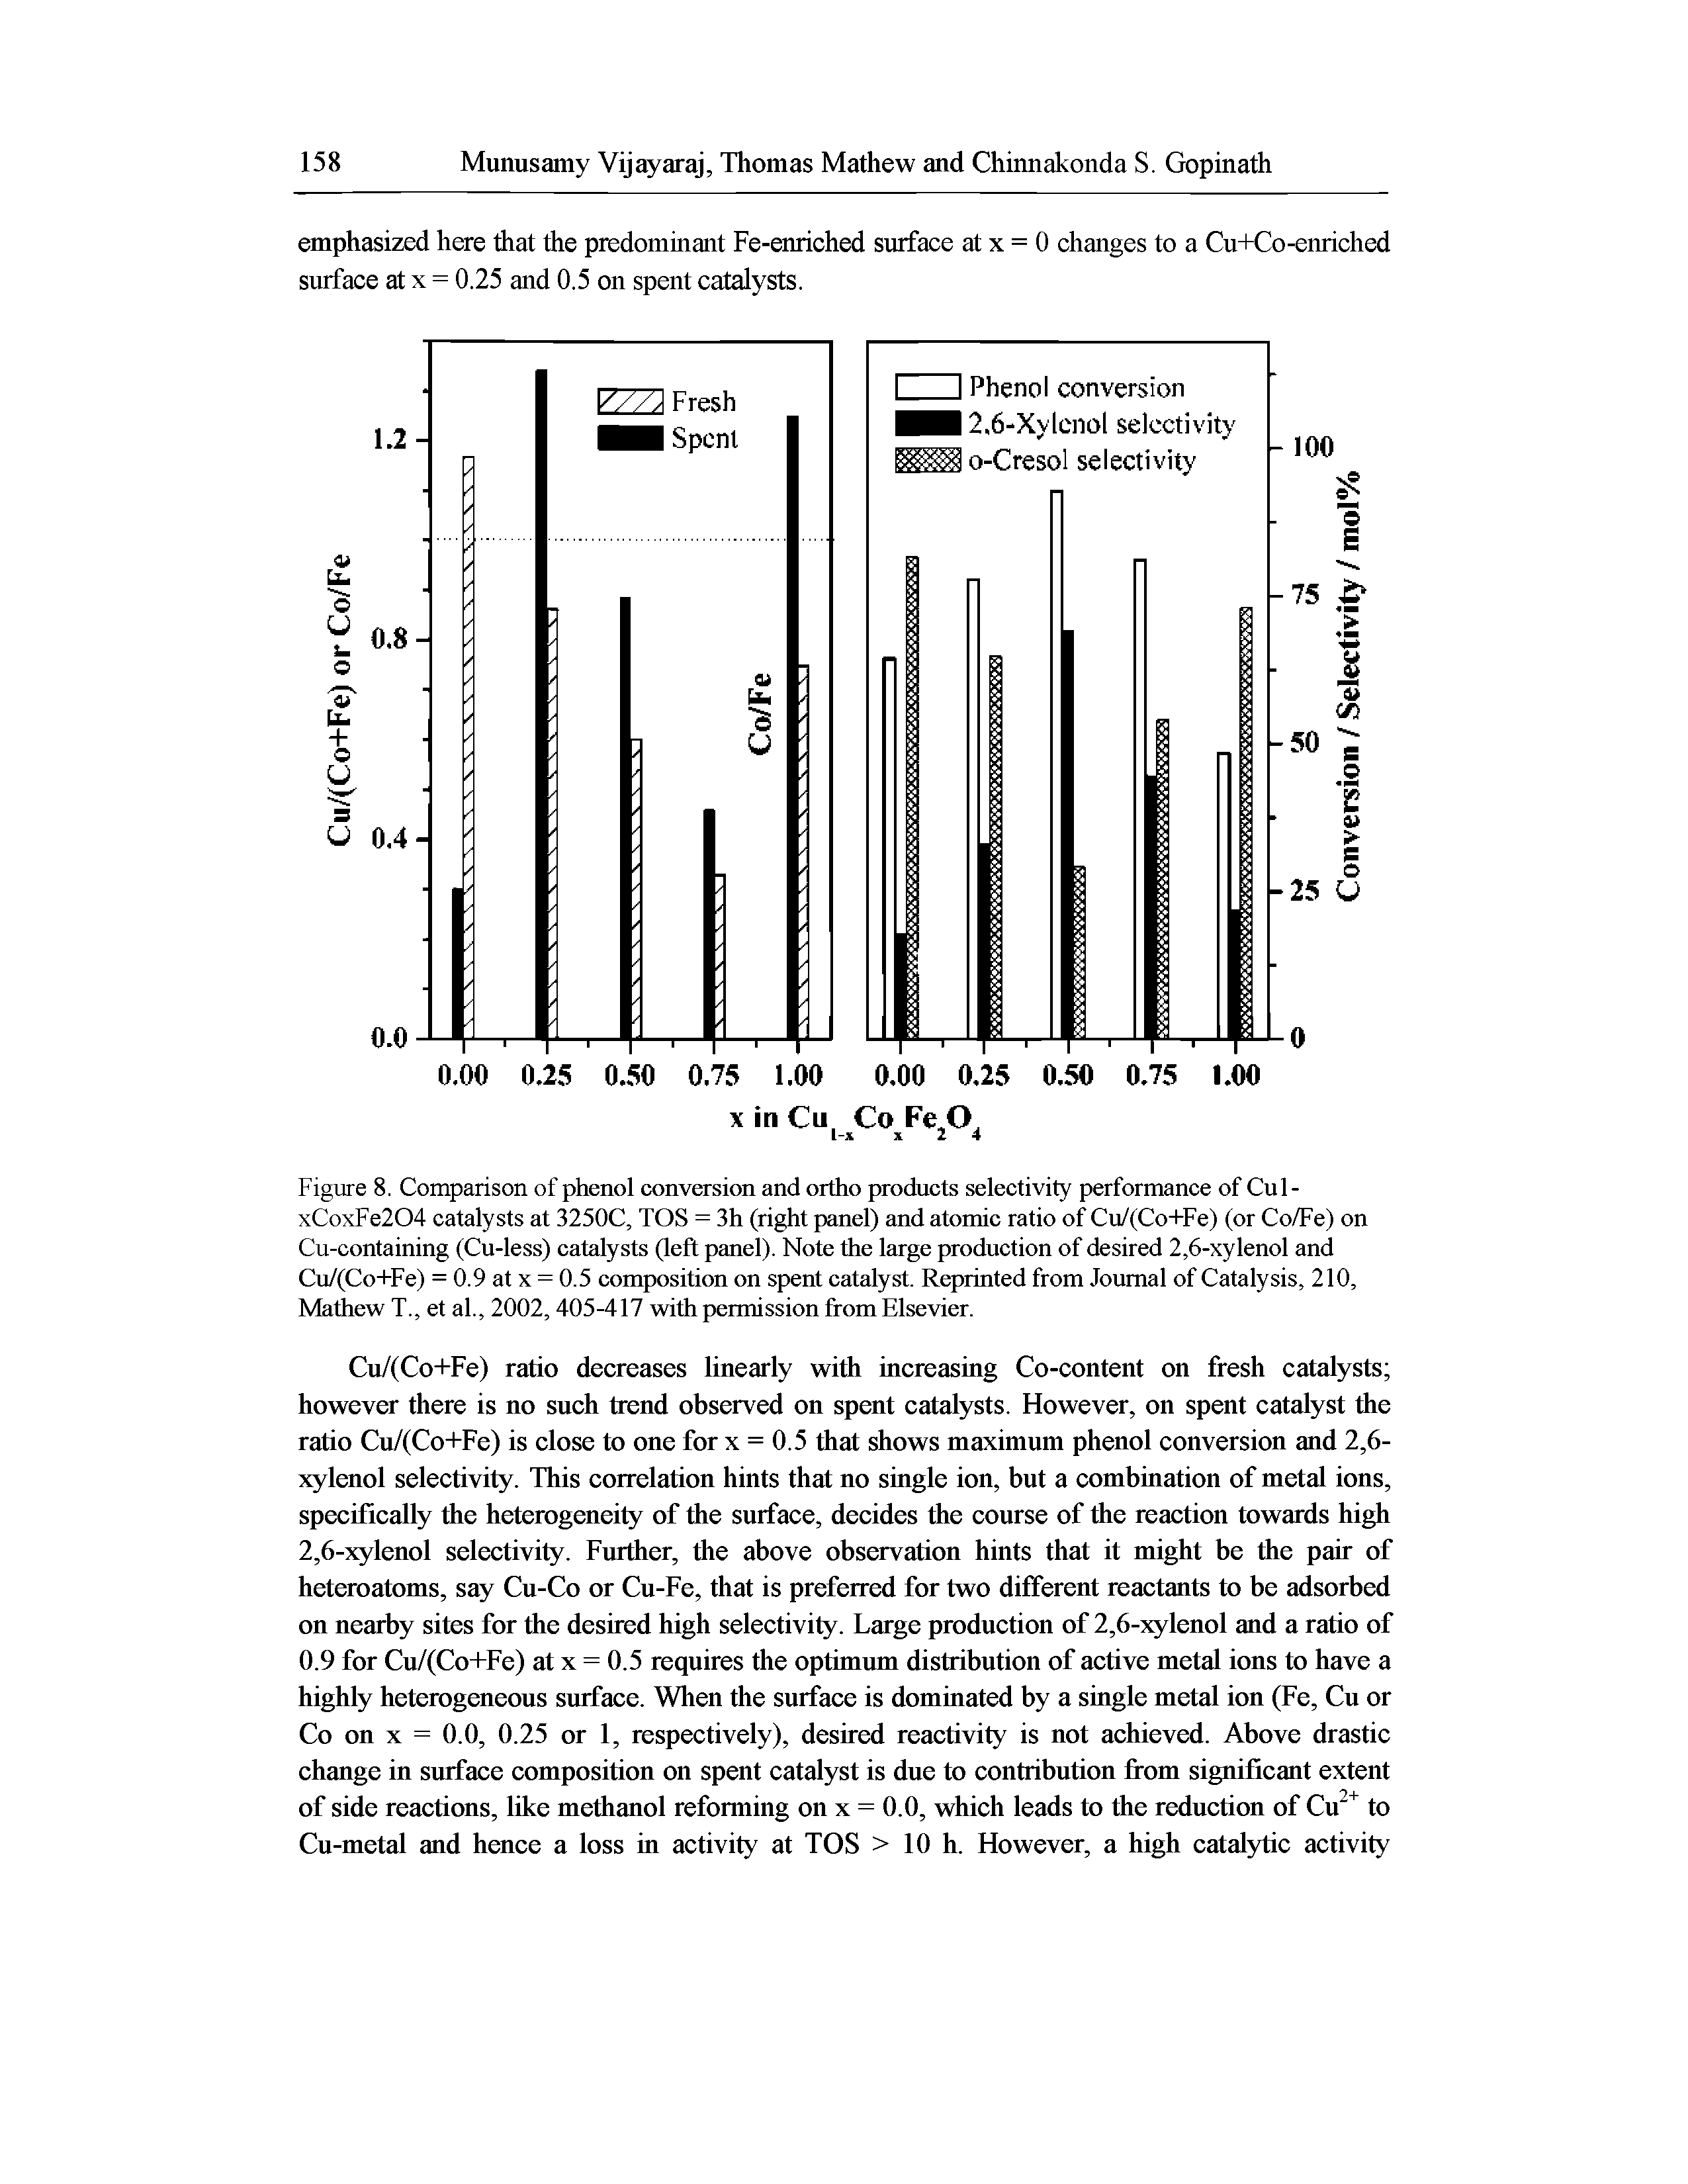 Figure 8. Comparison of phenol conversion and ortho products selectivity performance of Cul-xCoxFe204 catalysts at 3250C, TOS = 3h (right panel) and atomic ratio of Cu/(Co+Fe) (or Co/Fe) on Cu-containing (Cu-less) catalysts (left panel). Note the large production of desired 2,6-xylenol and Cu/(Co+Fe) = 0.9 at x = 0.5 composition on spent catalyst. Reprinted from Journal of Catalysis, 210, Mathew T., et al., 2002, 405-417 with permission from Elsevier.